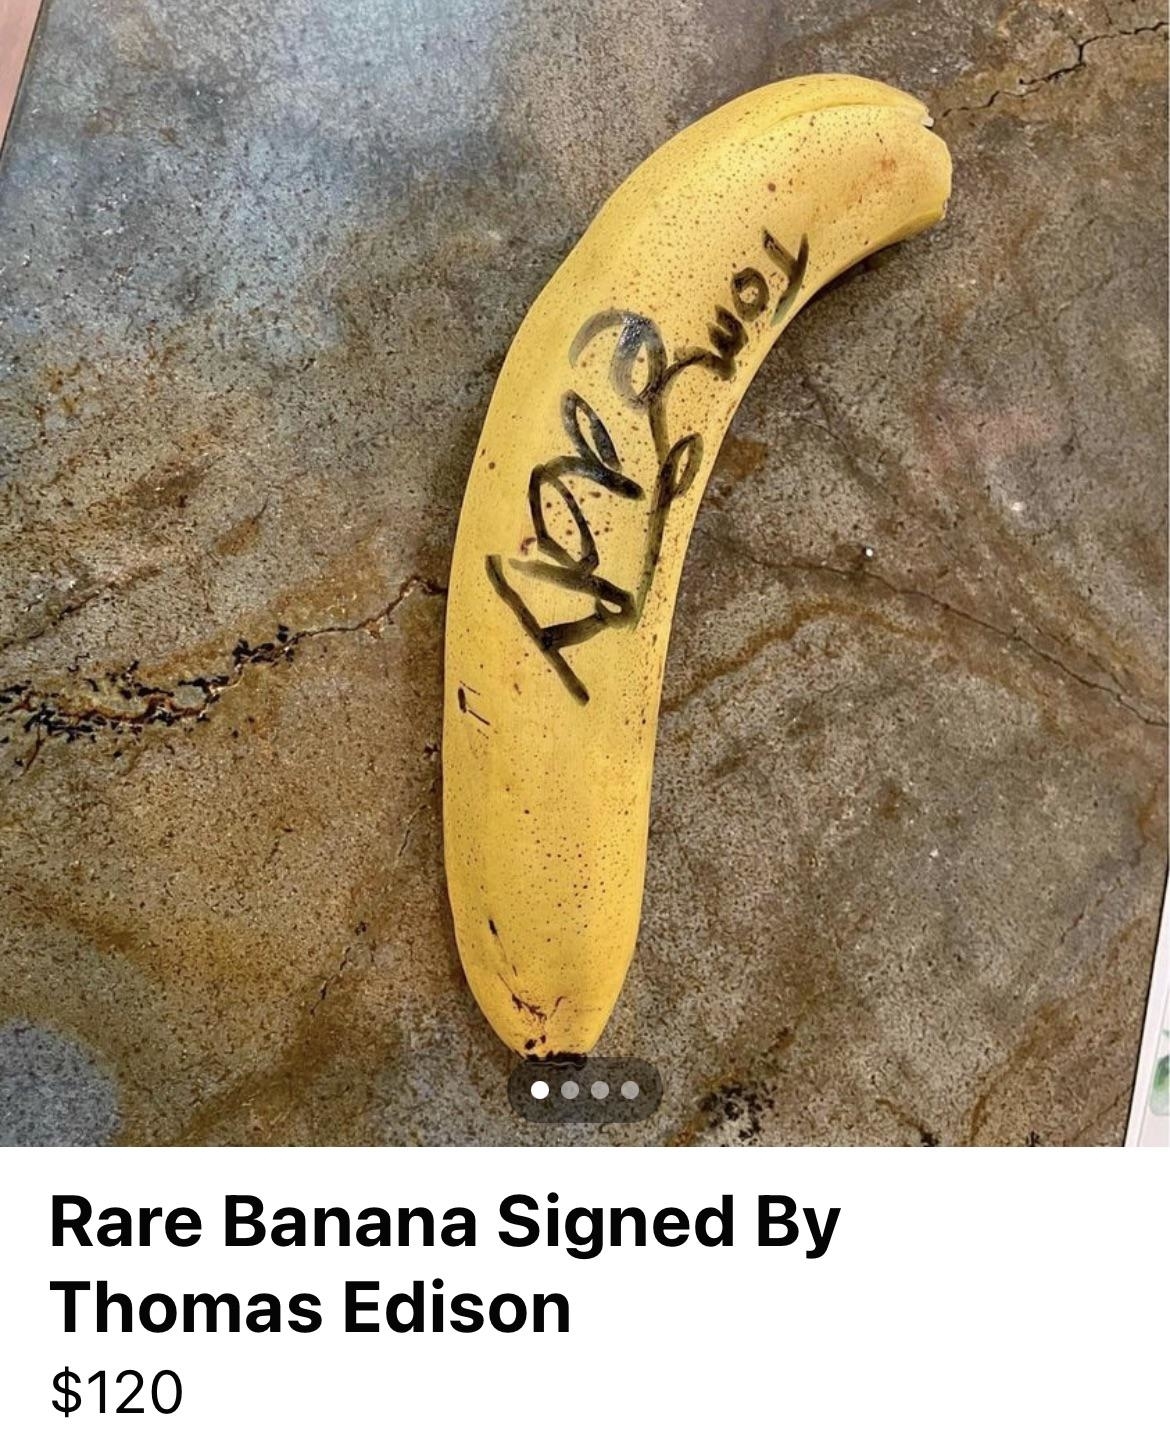 A &quot;rare banana&quot; with writing on it is labeled as signed by Thomas Edison, with a price of $120